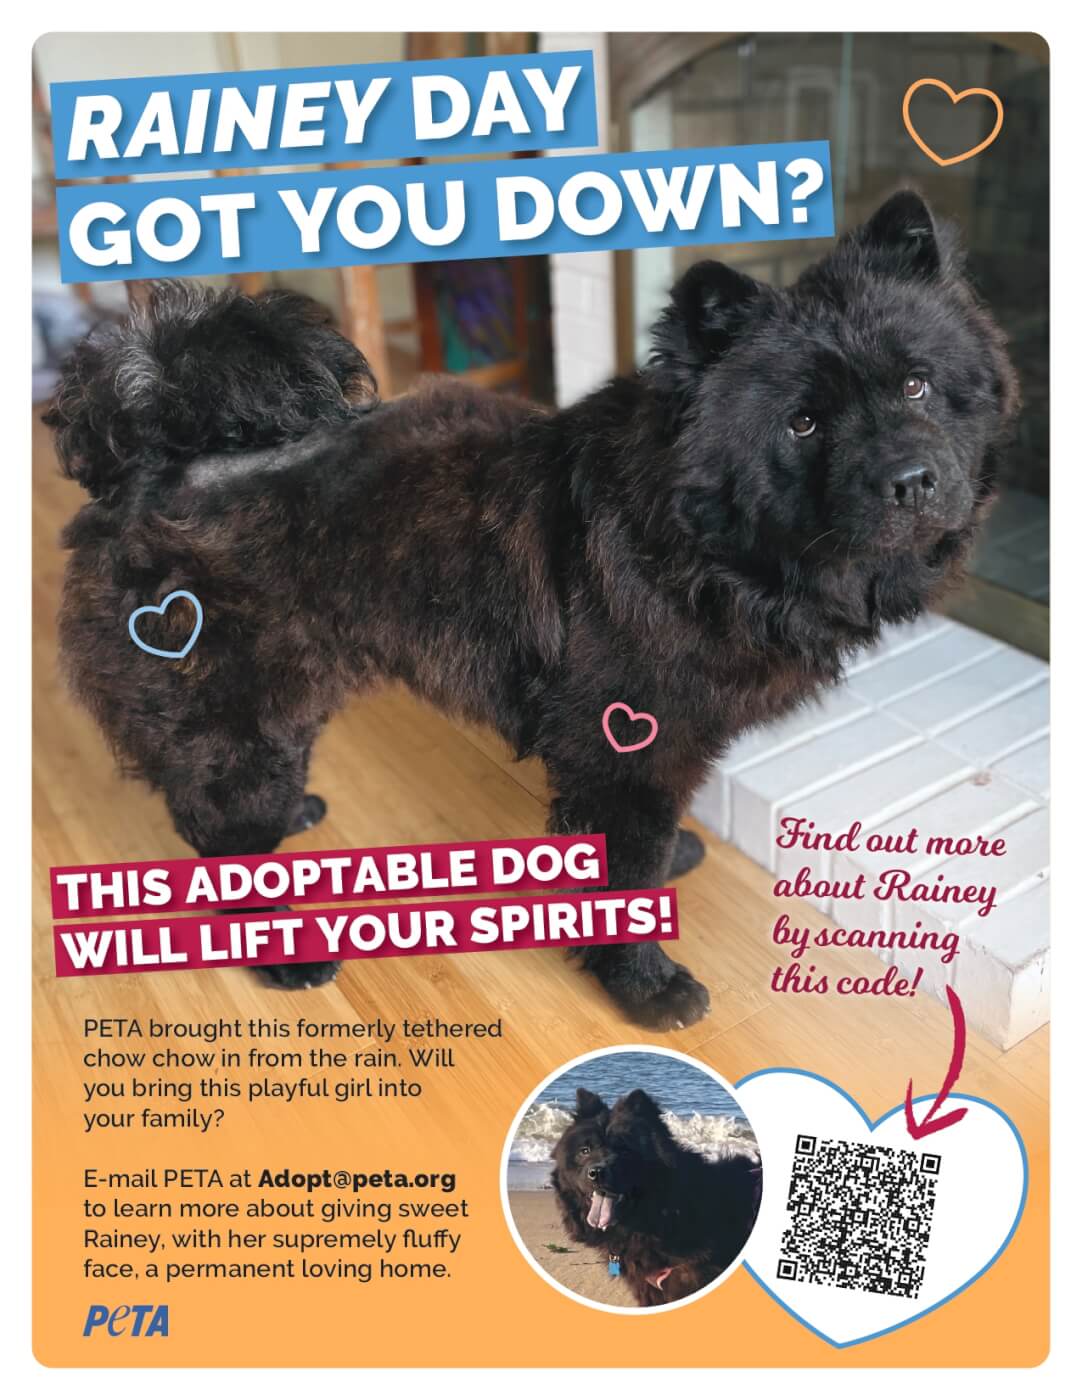 Adoption flyer for Rainey. The headline text reads "Rainey Day got you down? This adoptable dog will lift your spirits!"